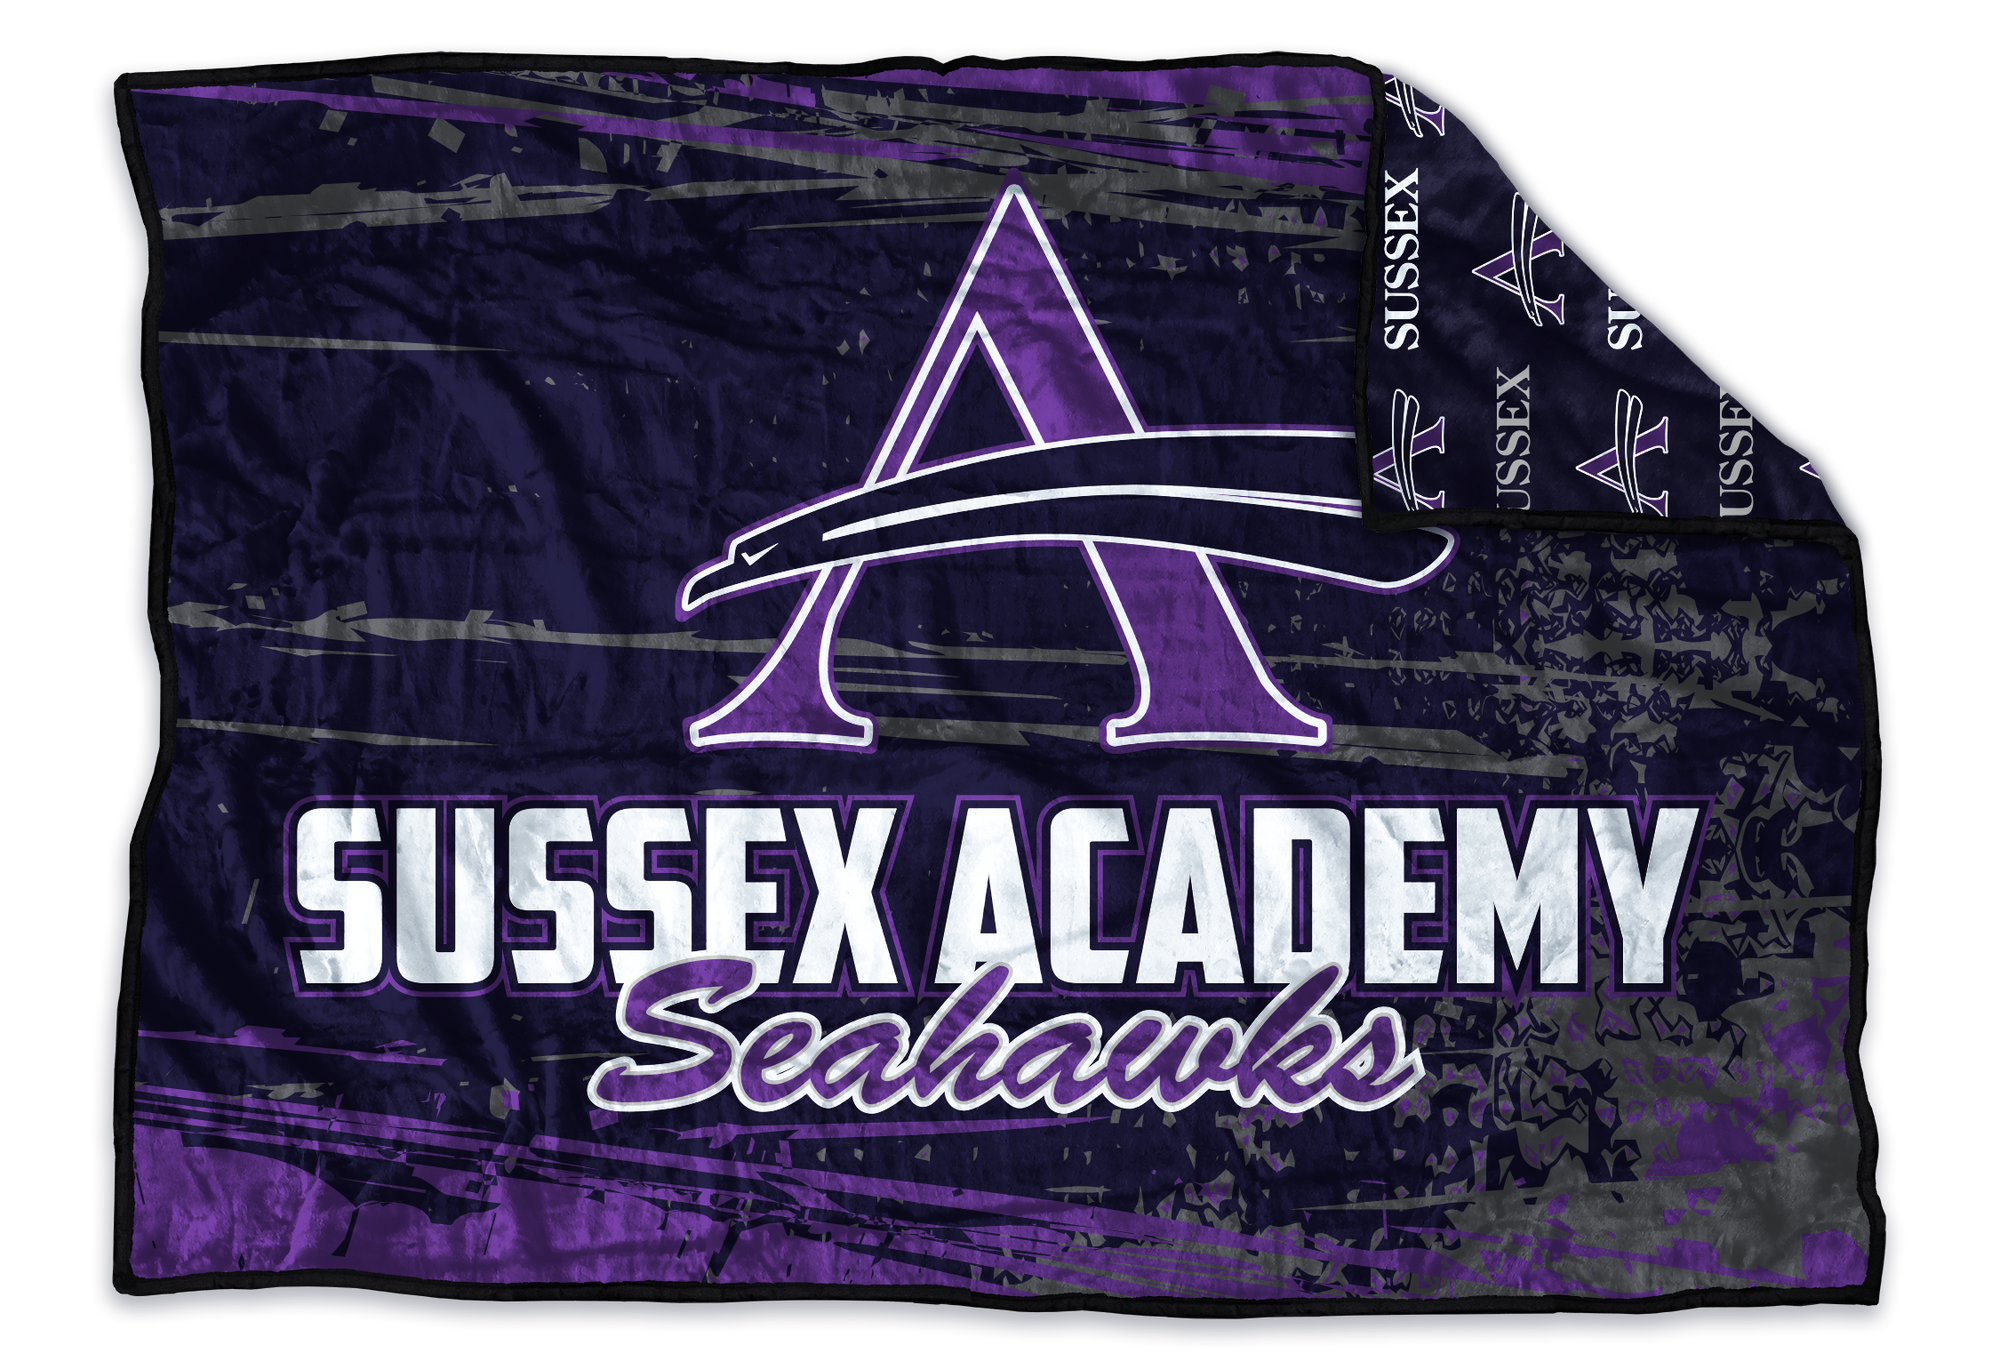 Sussex Academy Seahawks